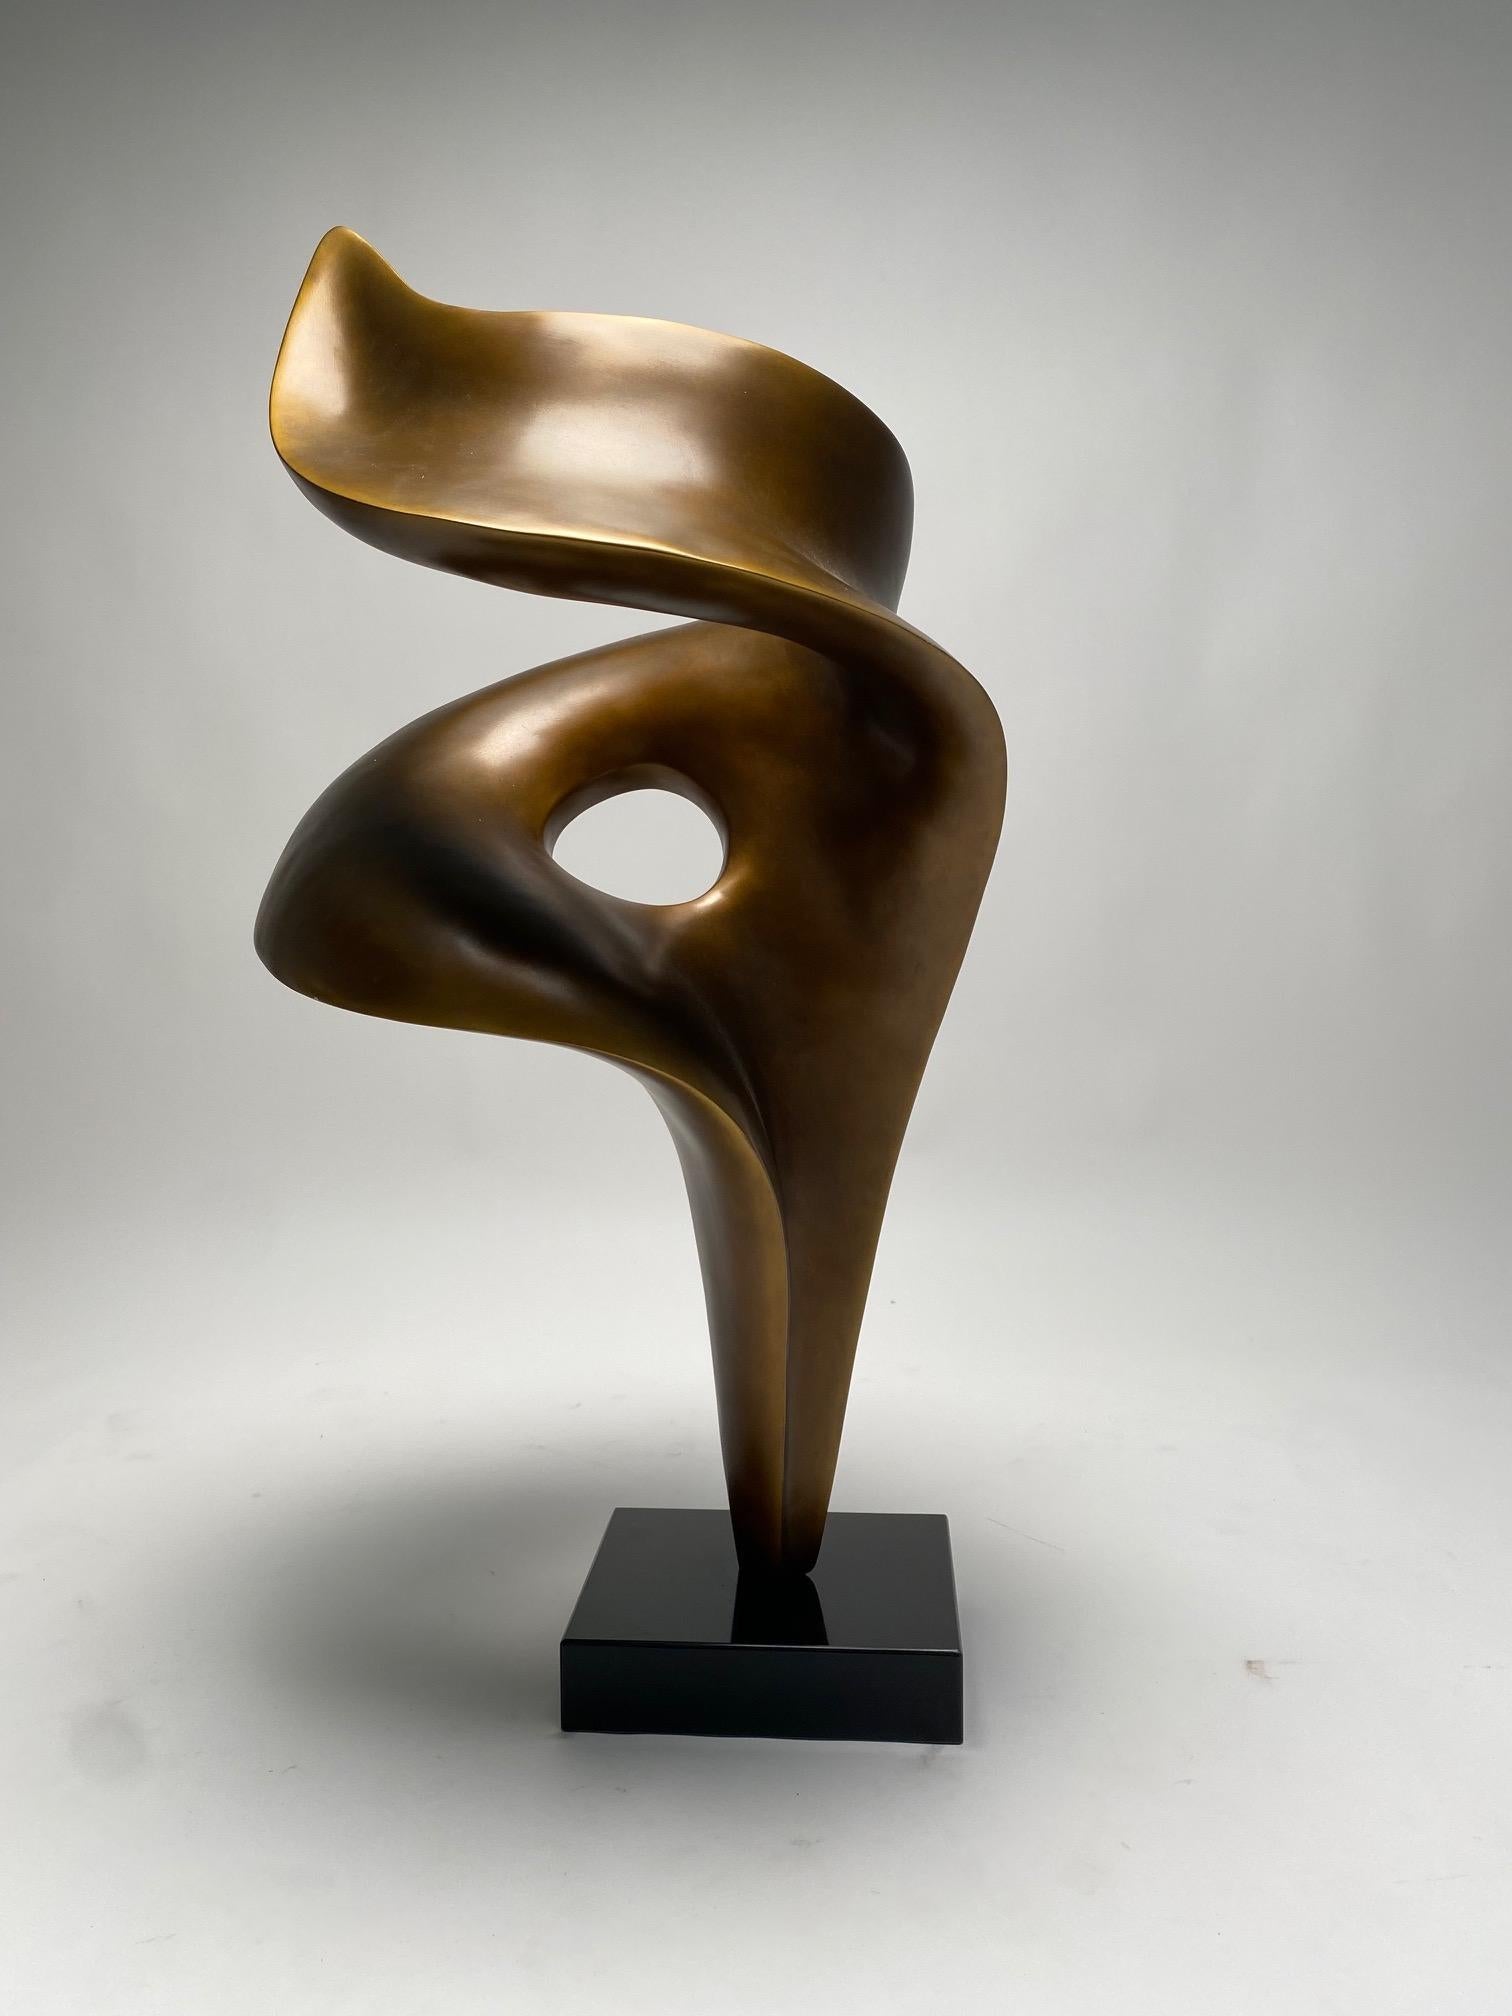 Monumental abstract organic sculpture, Italy, 1970 circa

The sculpture, coming from a villa in Florence, is made of resin and shows signs of wear compatible with age. Unfortunately we do not know either the author or the edition of the work, which